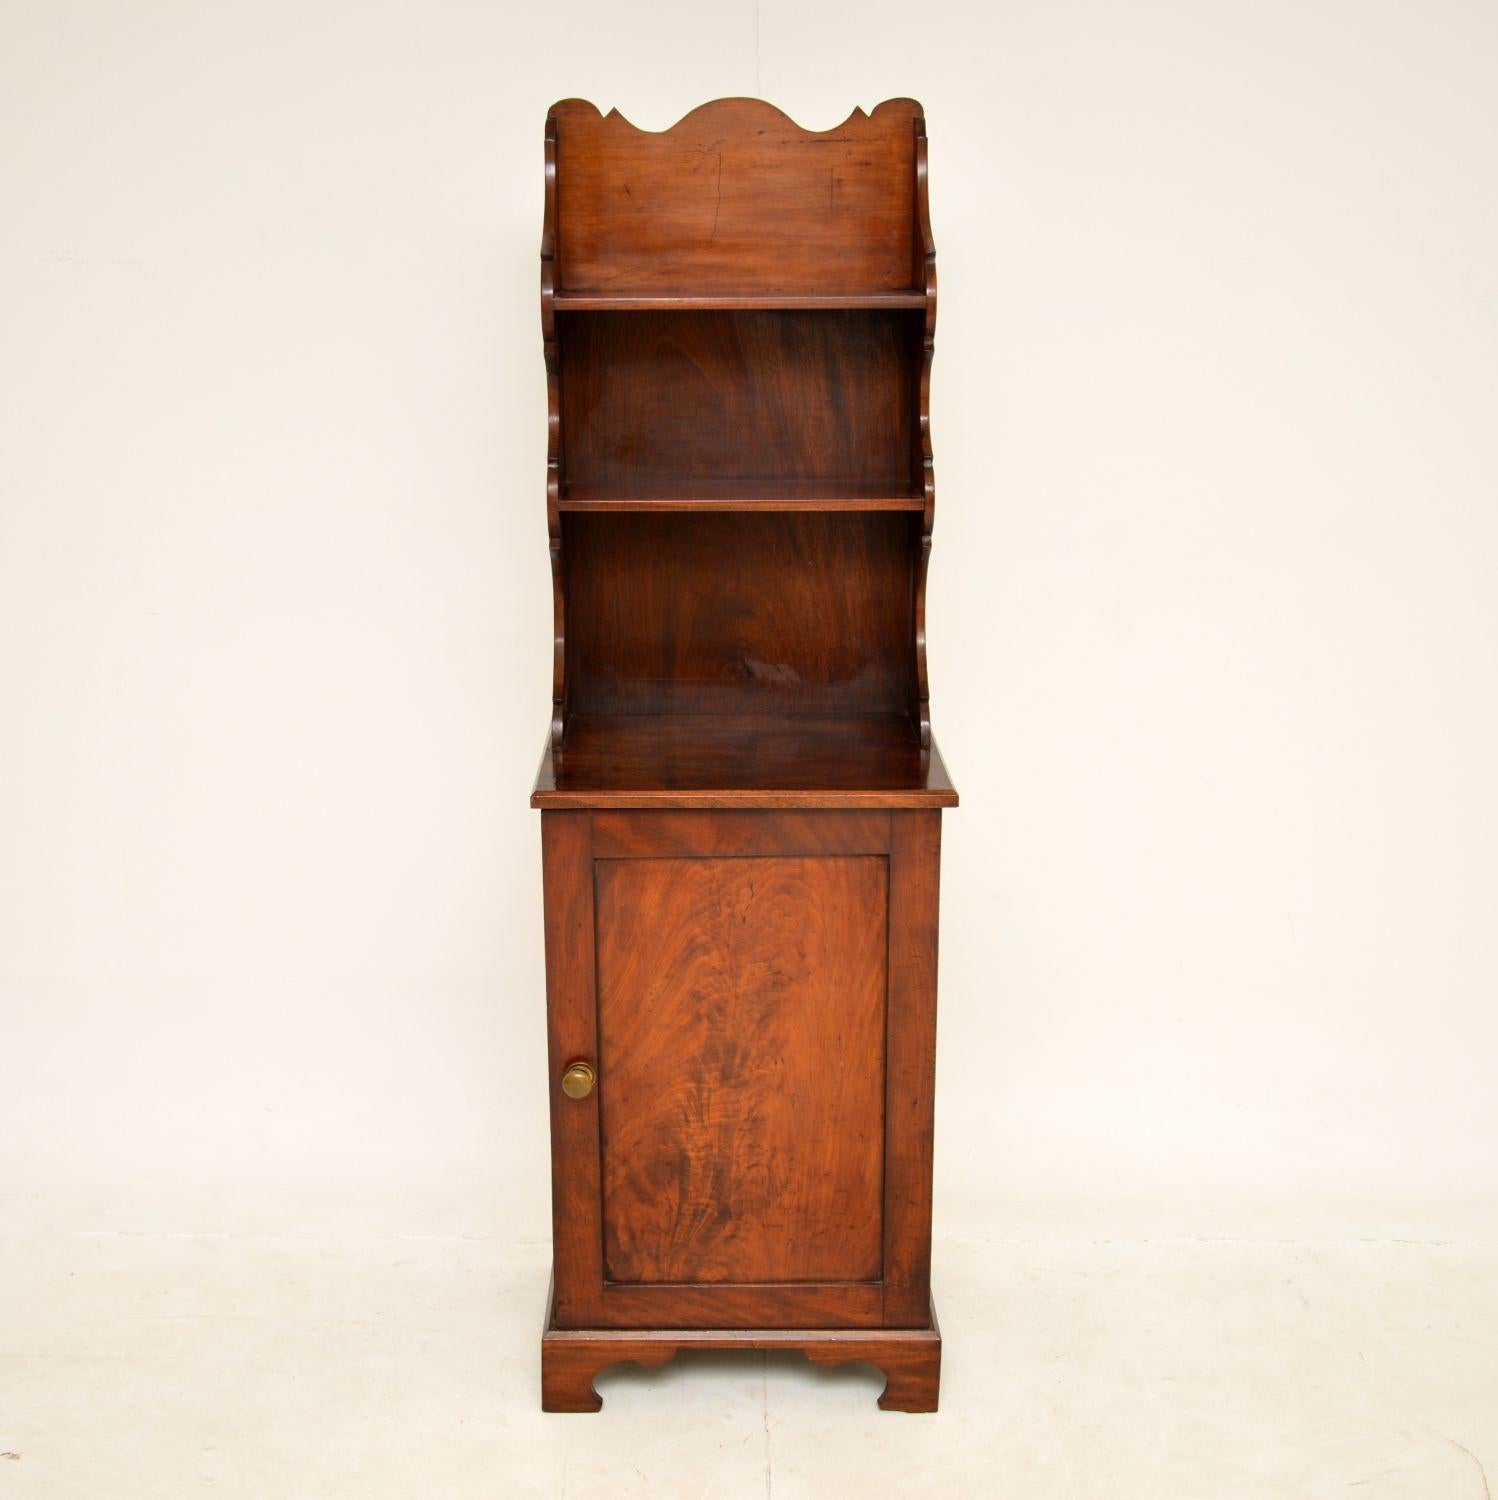 A stunning & very slim antique George III period dresser. This was made in England, it dates from around the 1790-1810 period.

It is of superb quality and is a very useful size, being quite slim yet containing plenty of storage space. The upper